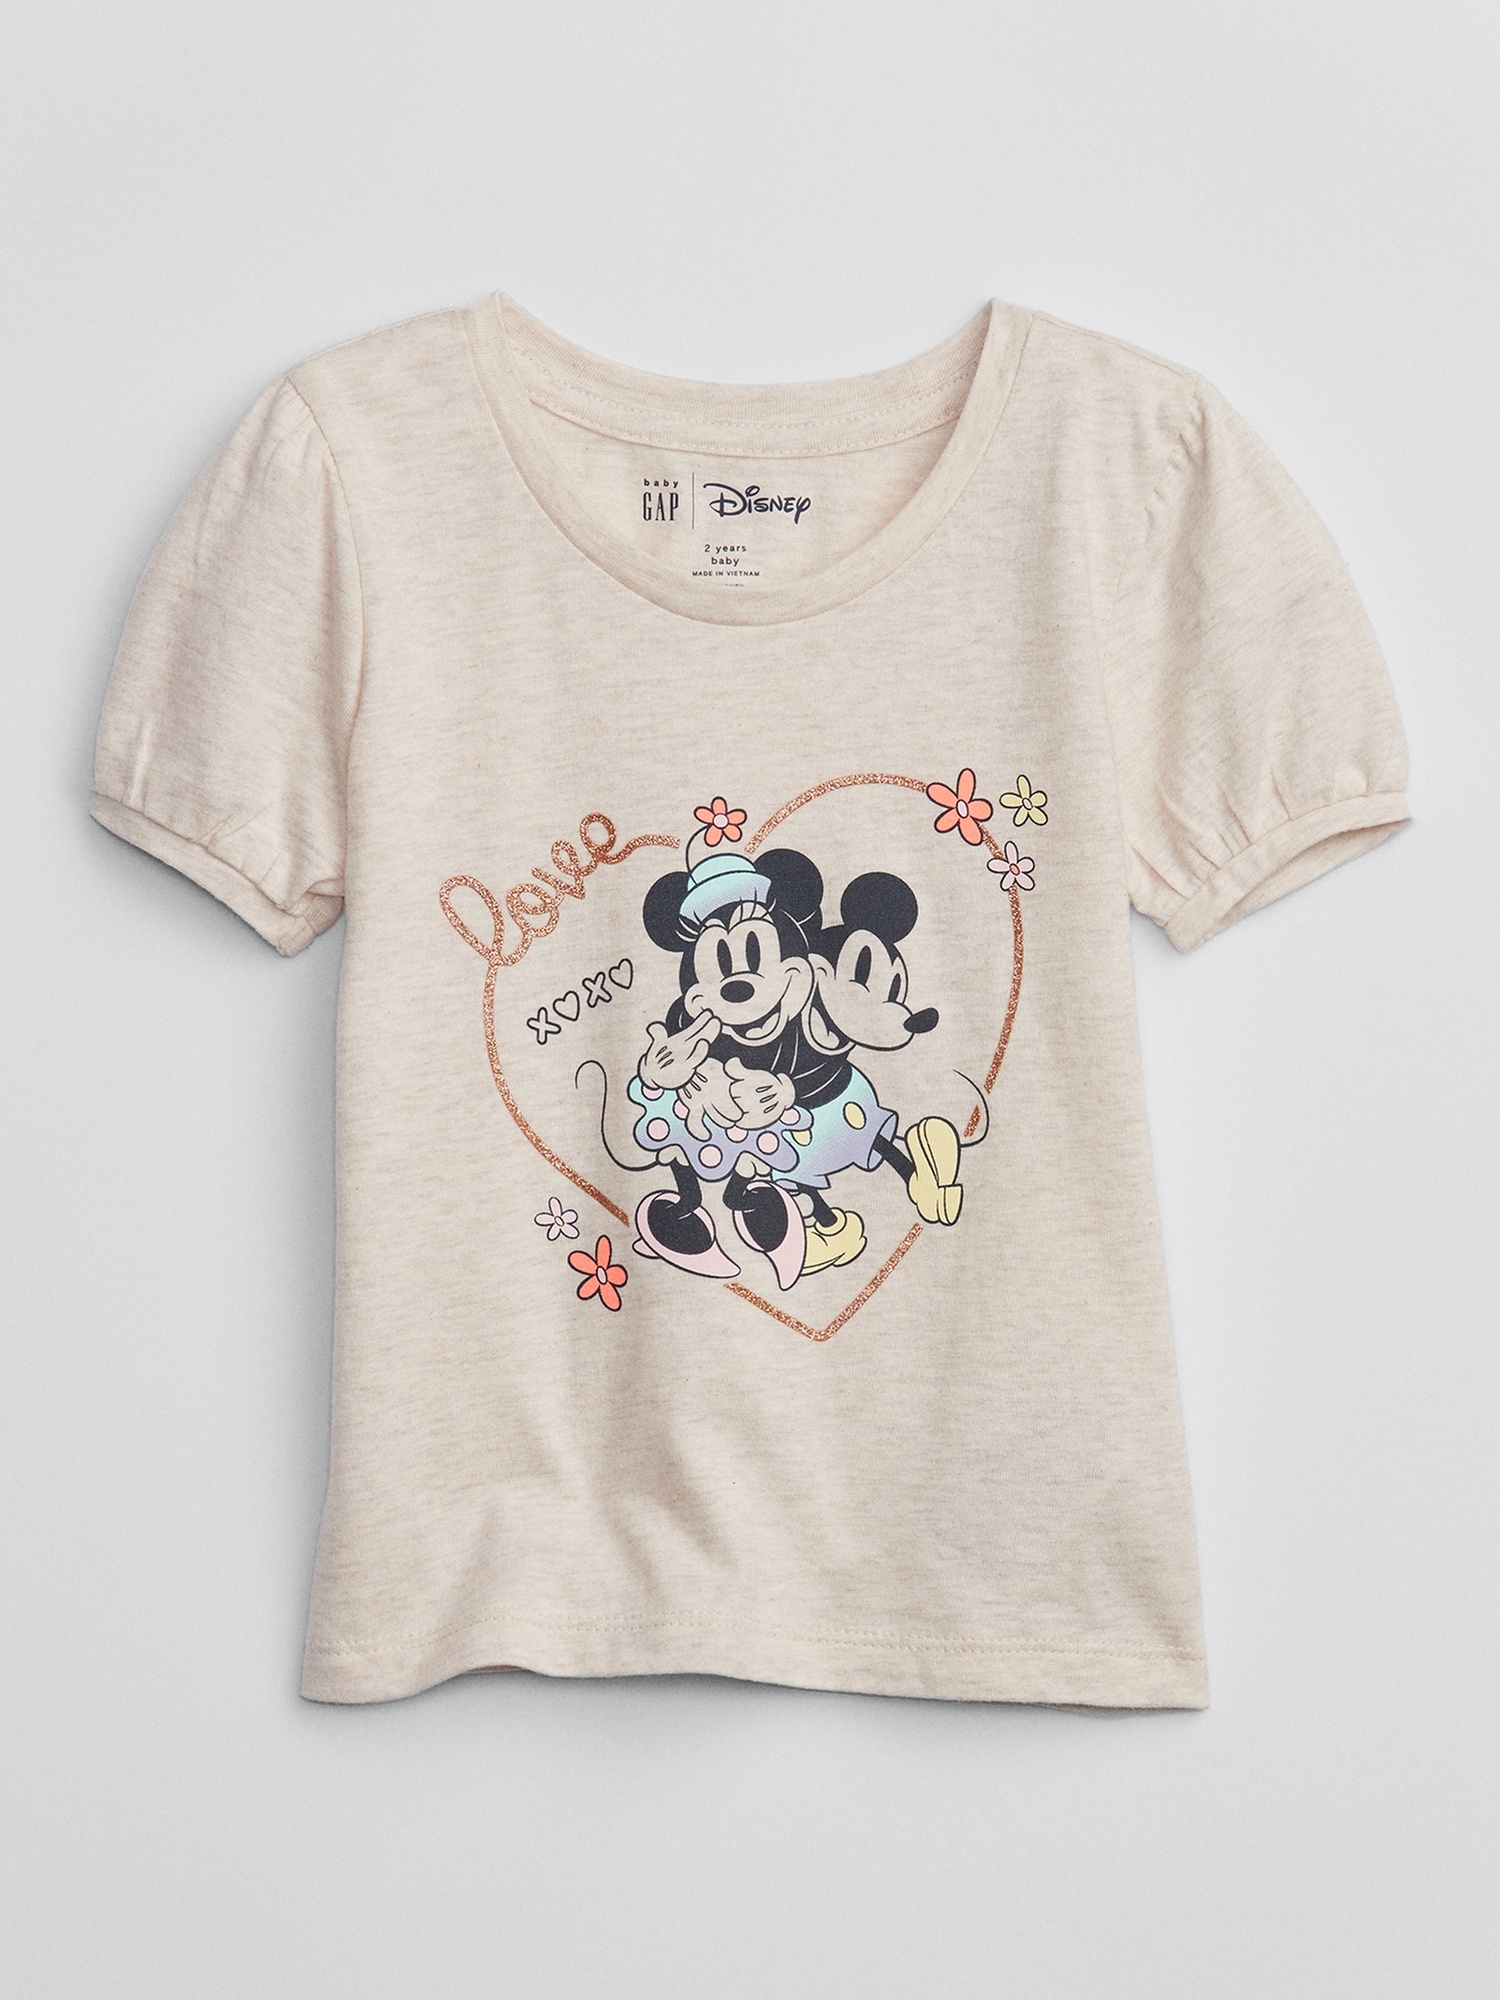 husdyr Psykiatri stof babyGap | Disney Mickey Mouse and Minnie Mouse Graphic T-Shirt | Gap Factory